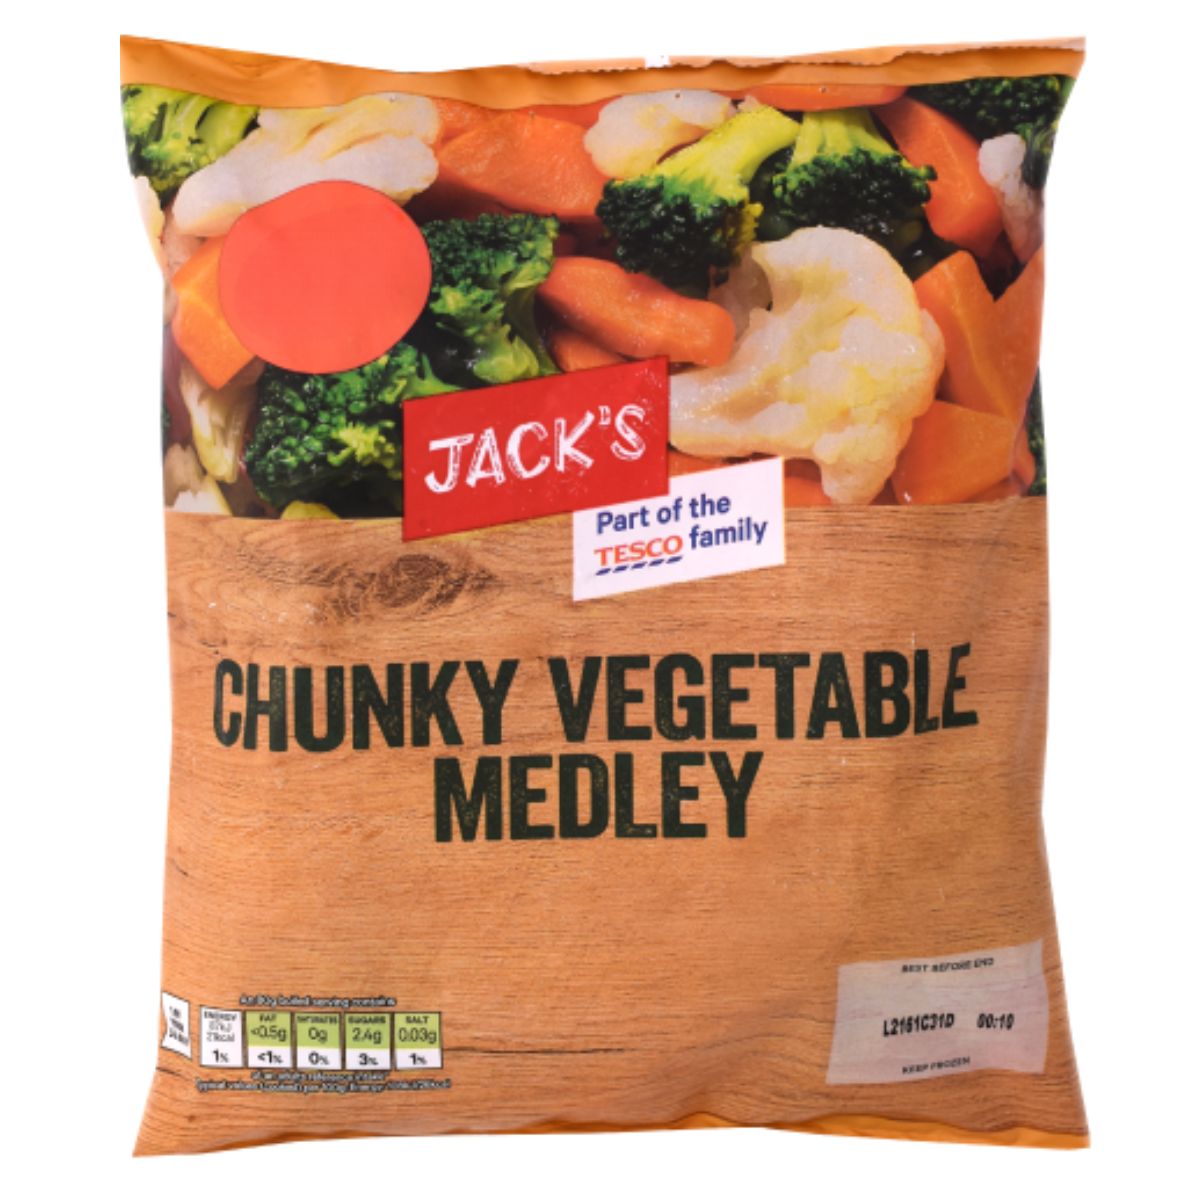 A bag of Jacks - Chunky Vegetable Medley - 500g on a white background.